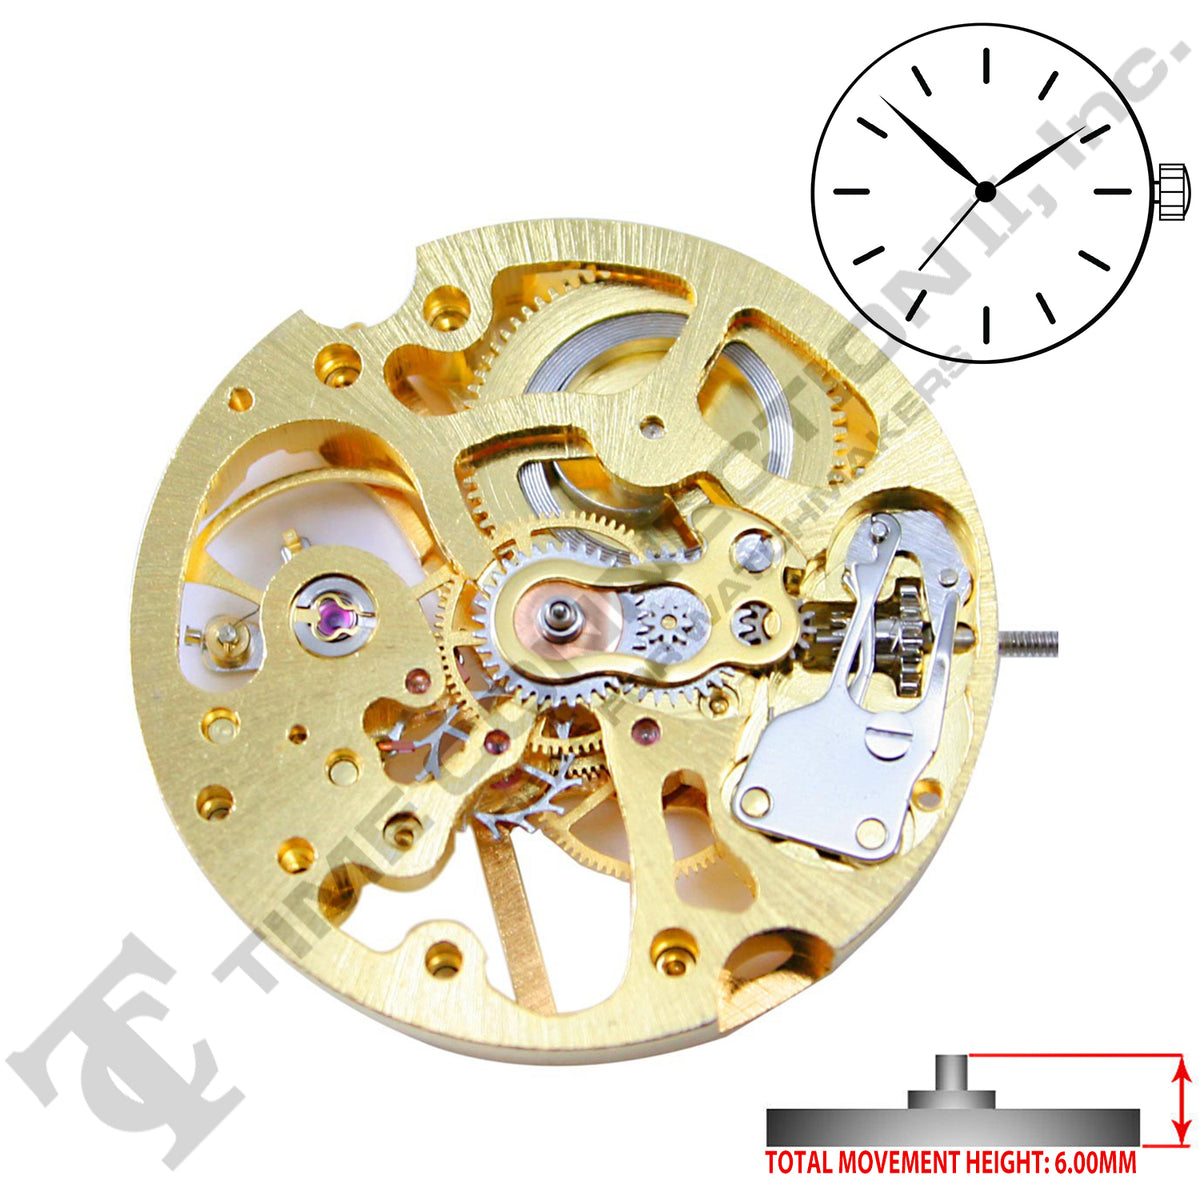 China 2650-G Mechanical Movement Ht. 6.00MM – Time Connection II, Inc